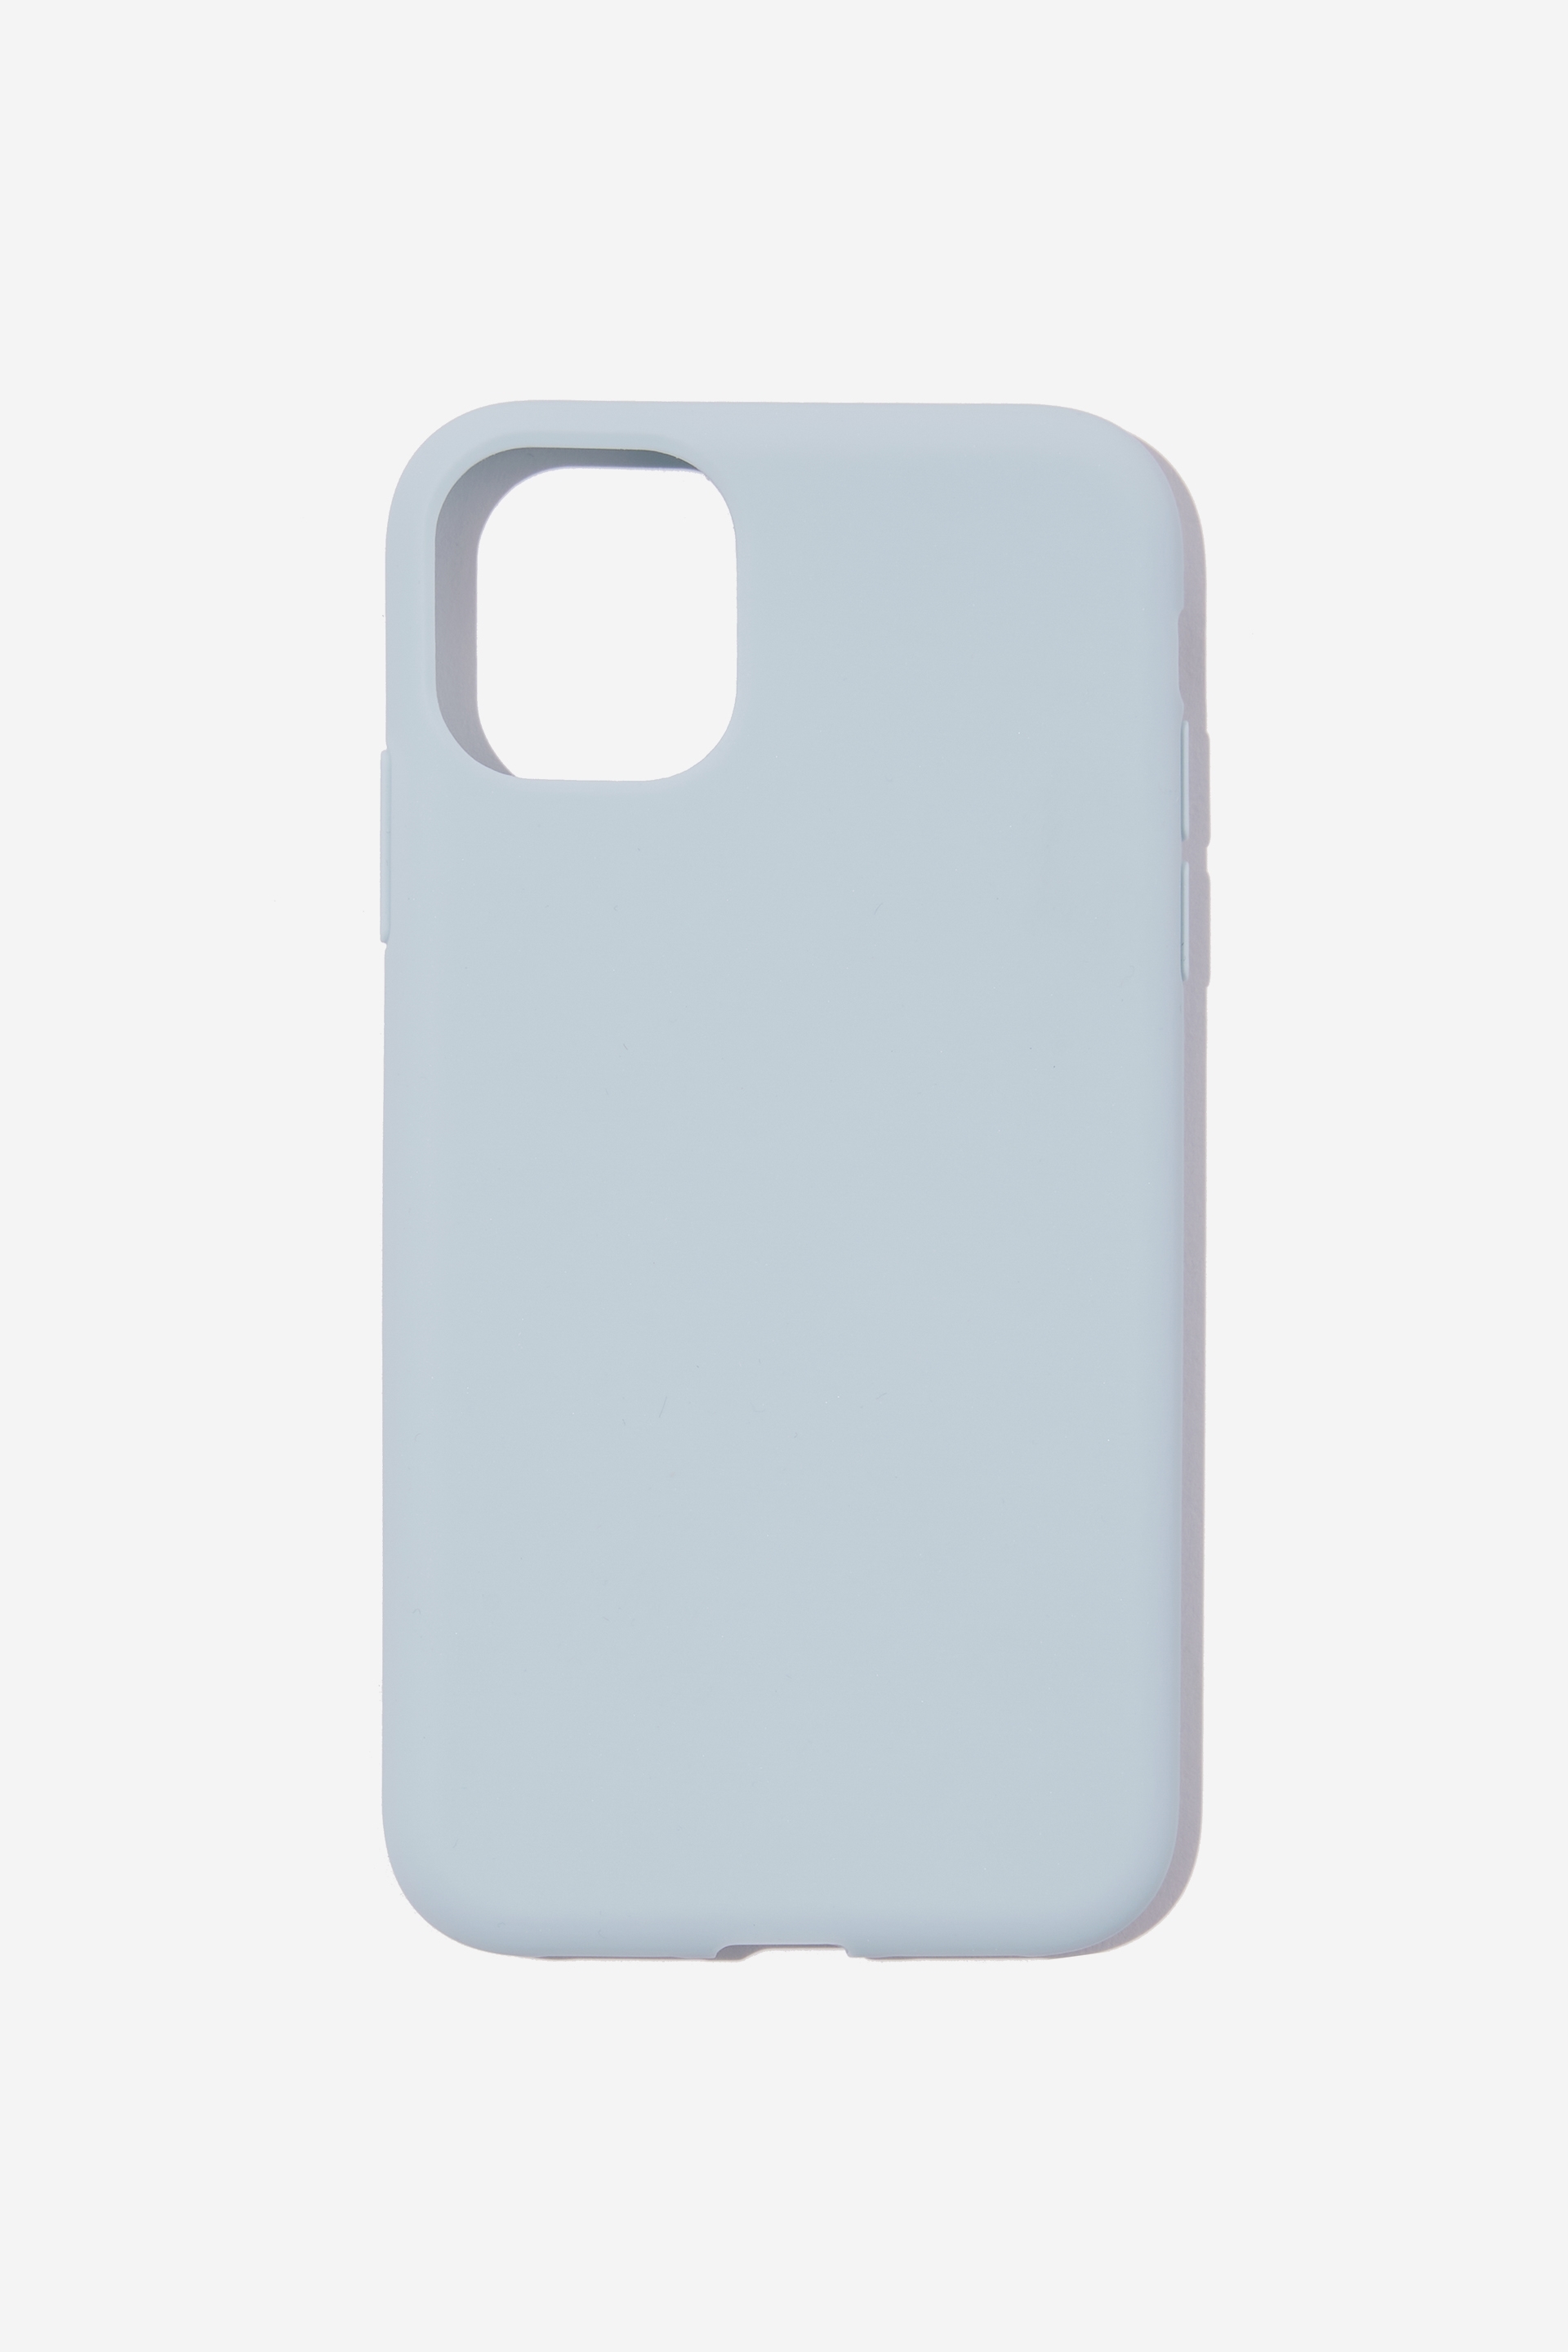 Typo - Recycled Phone Case iPhone 11 - Arctic blue